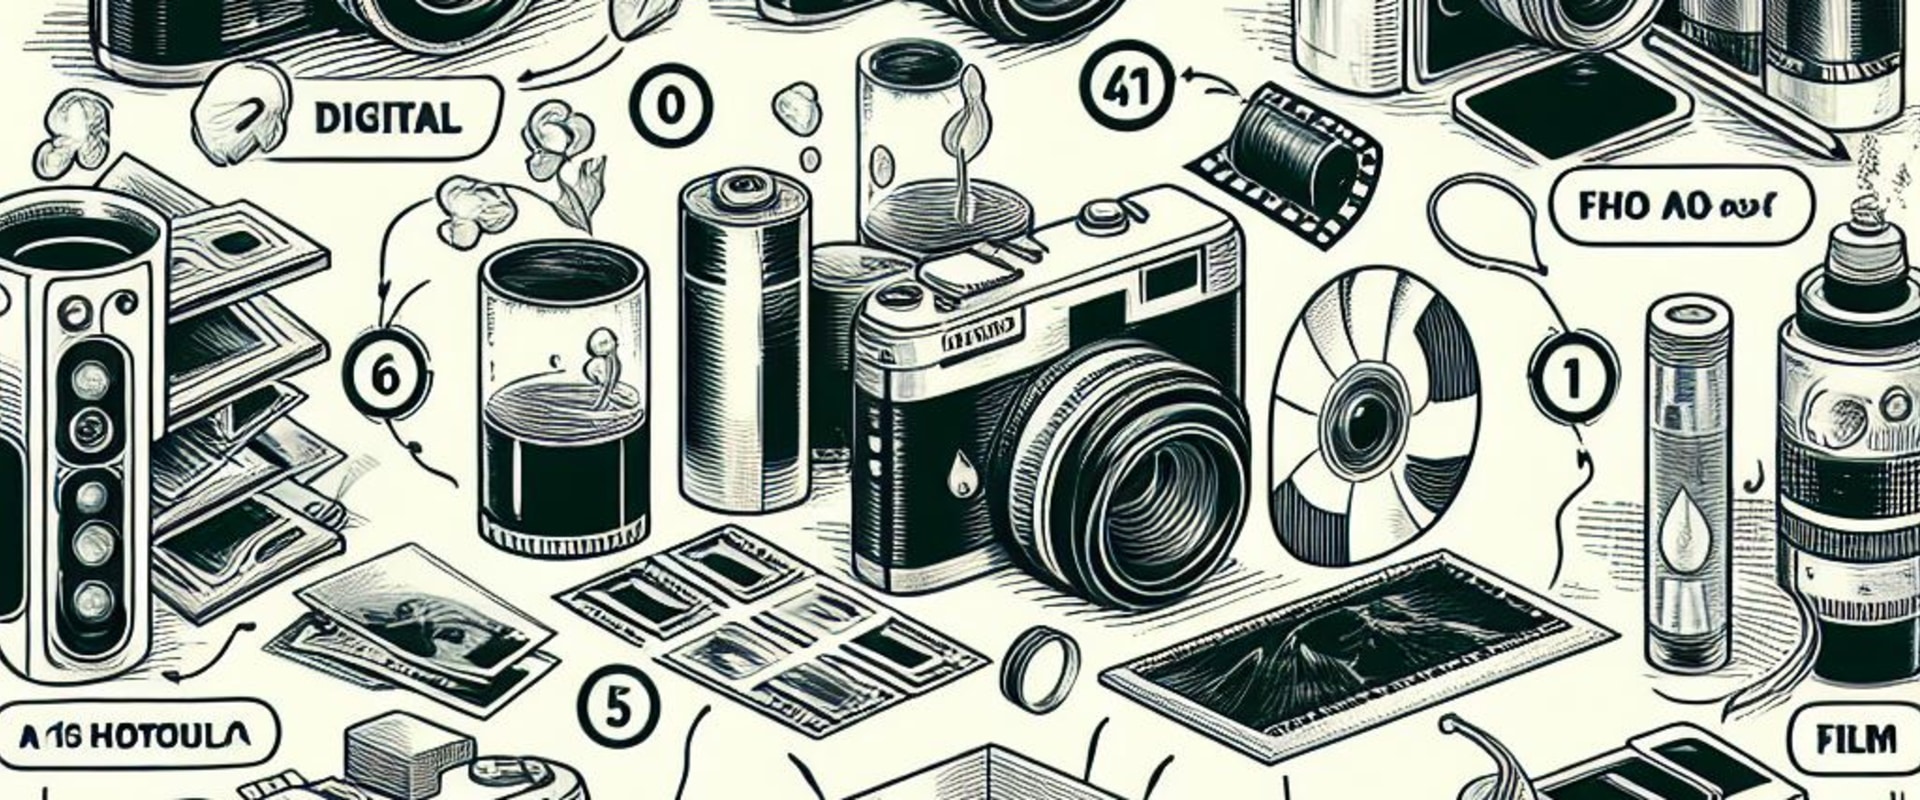 How to Label Photography Medium: Guide for Photographers and Art Enthusiasts